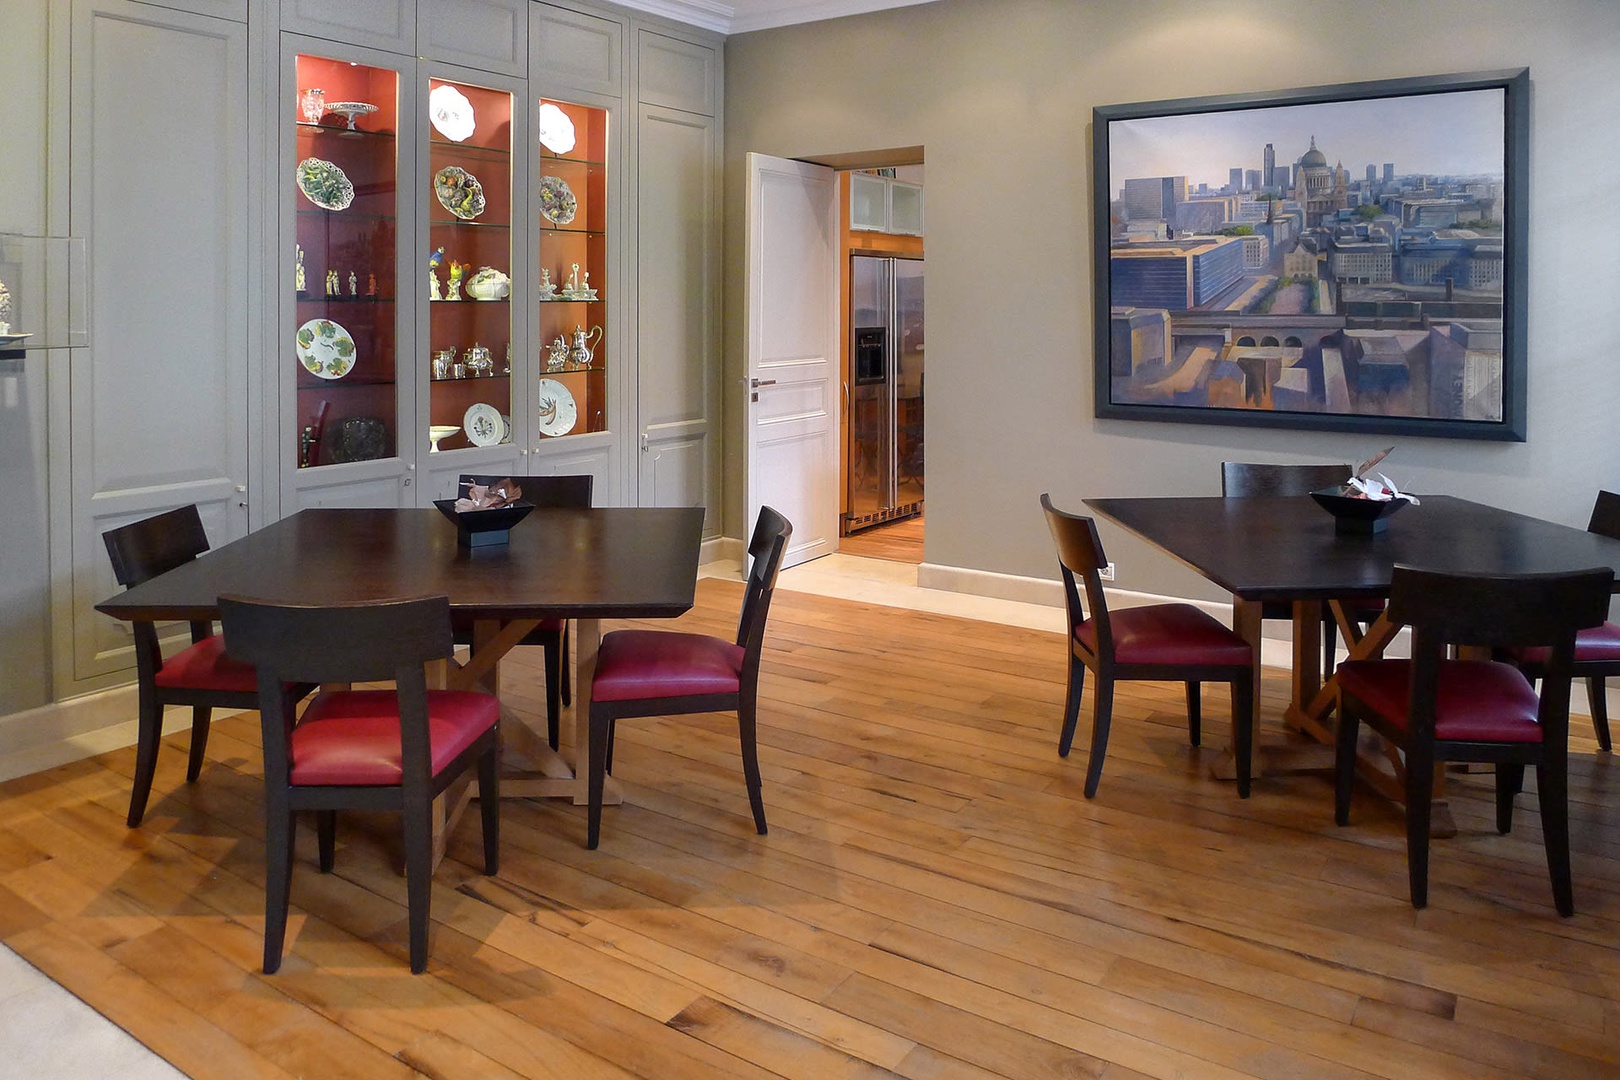 The large dining room with two tables is perfect for entertaining.